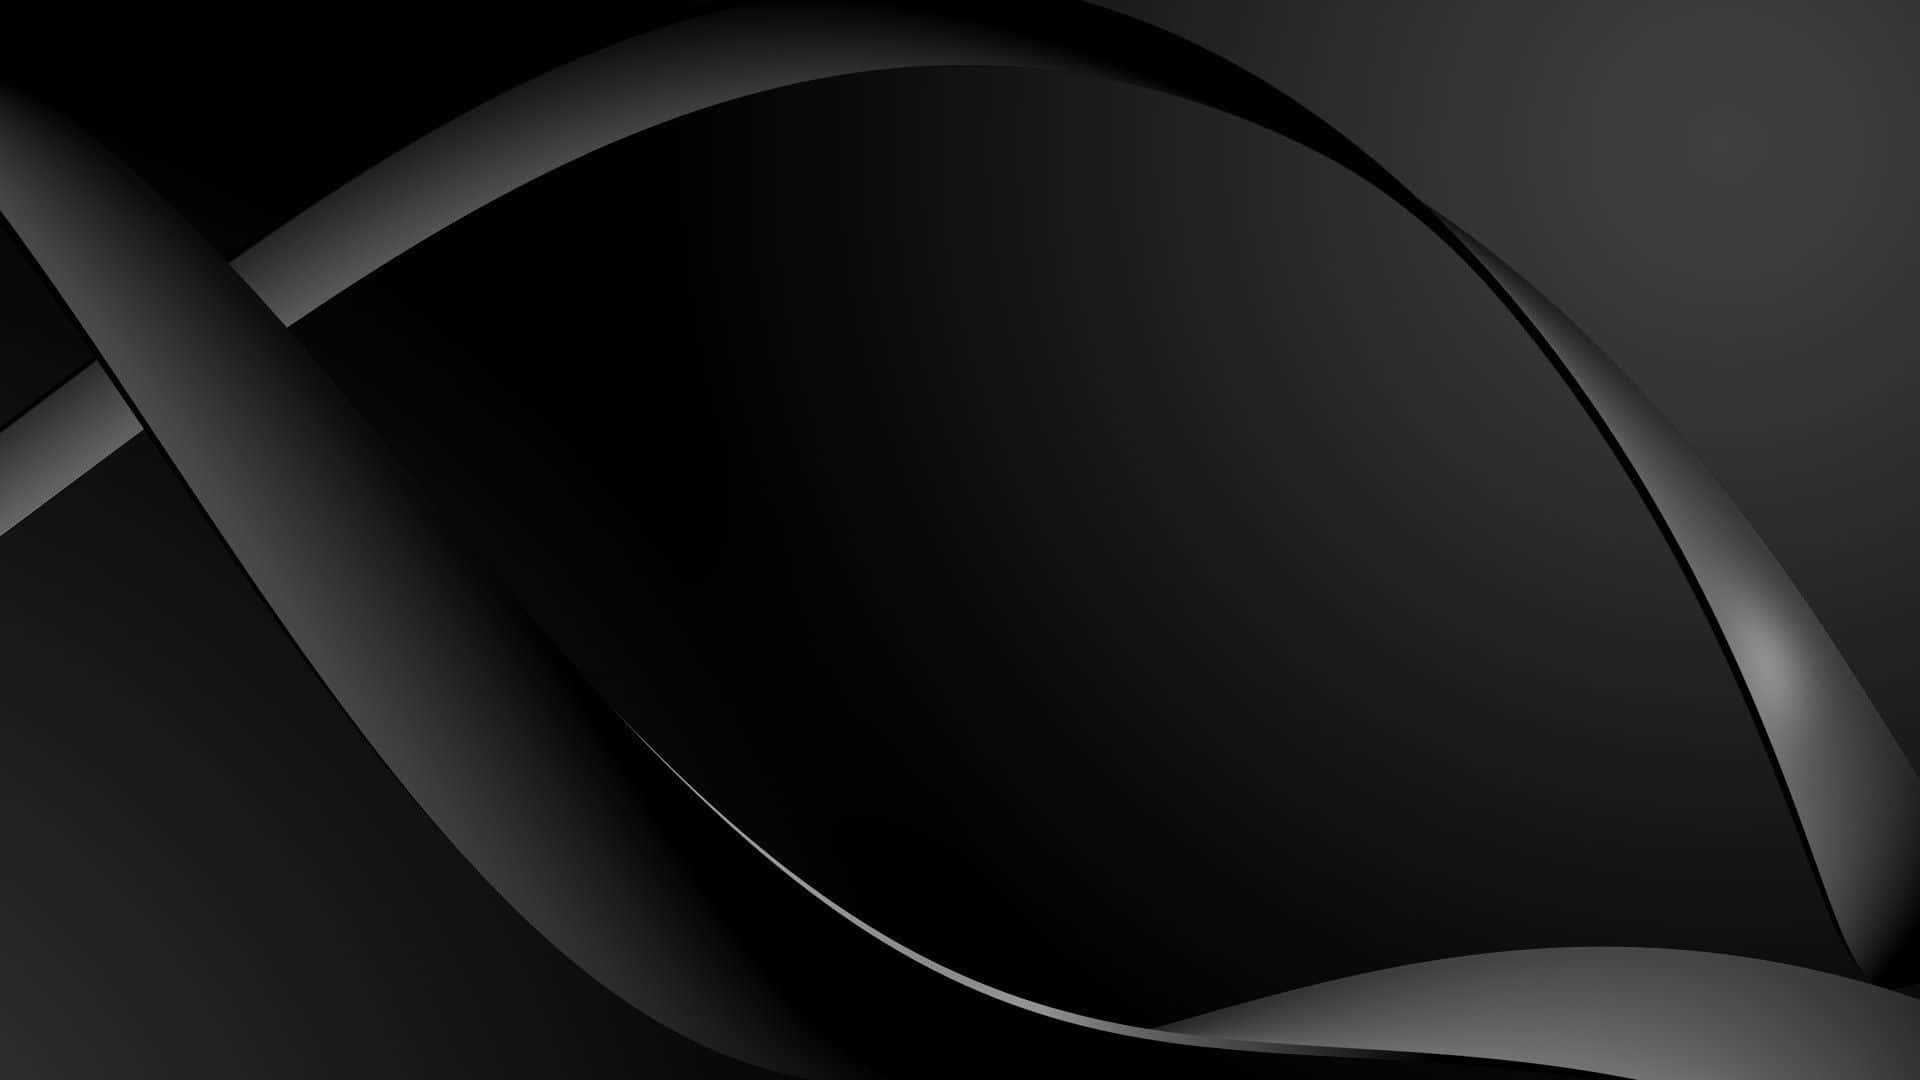 A Black Background With A Curved Shape